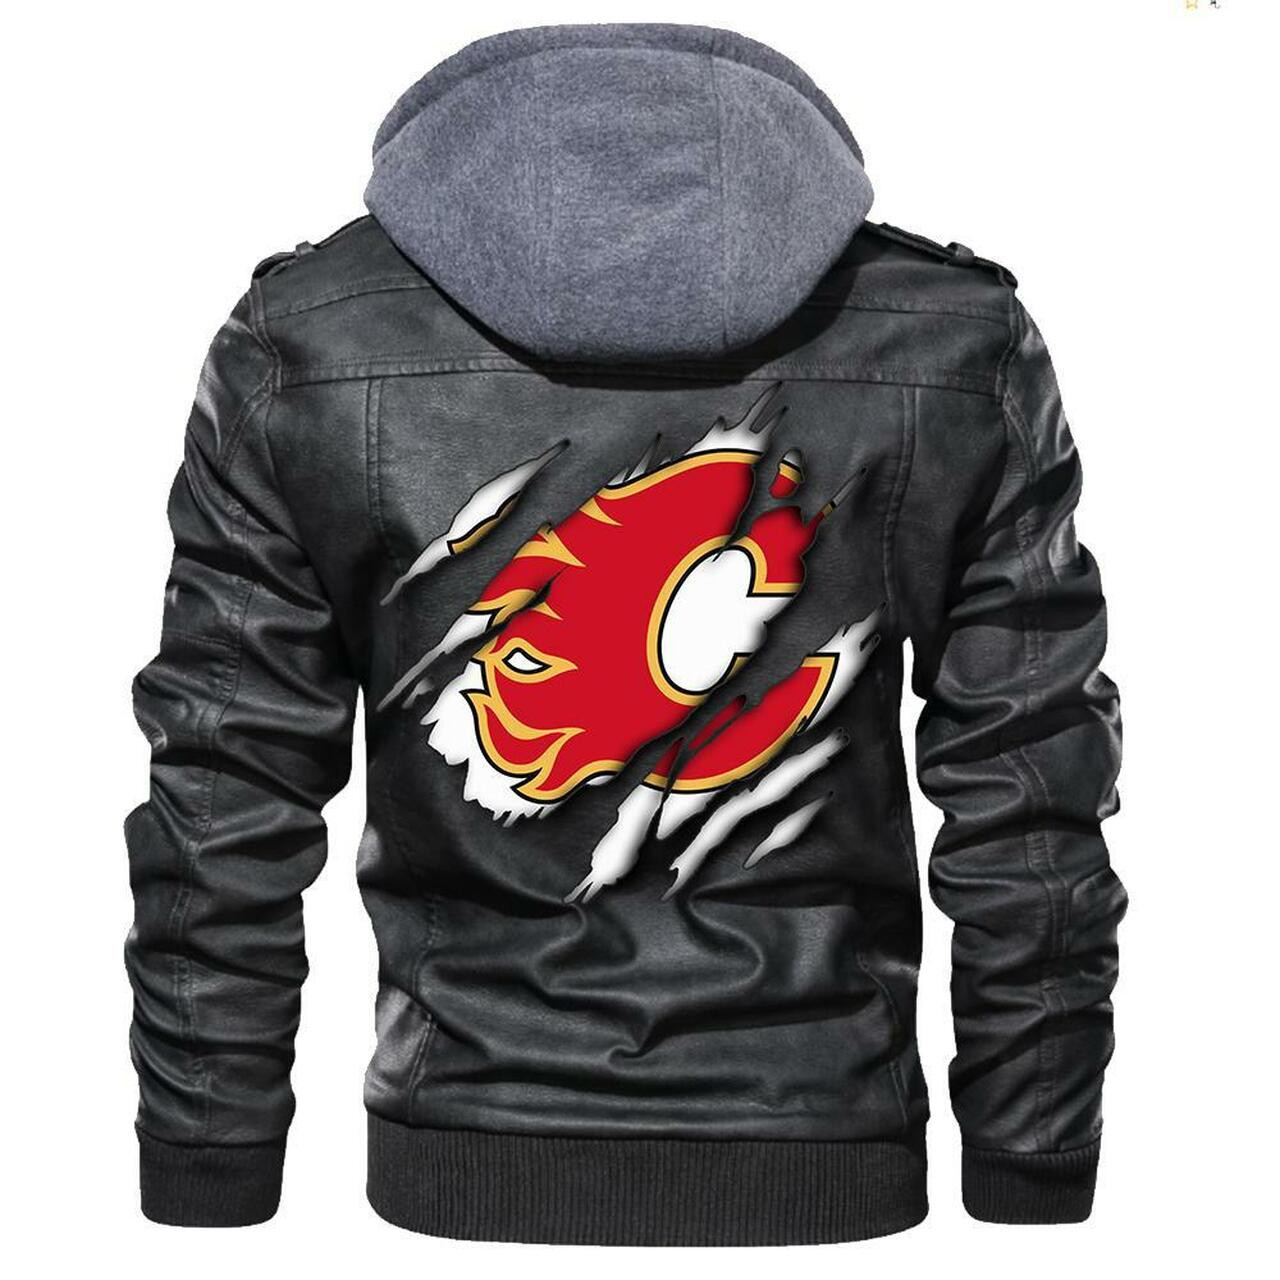 You'll get the best Leather Jacket by shopping online 85